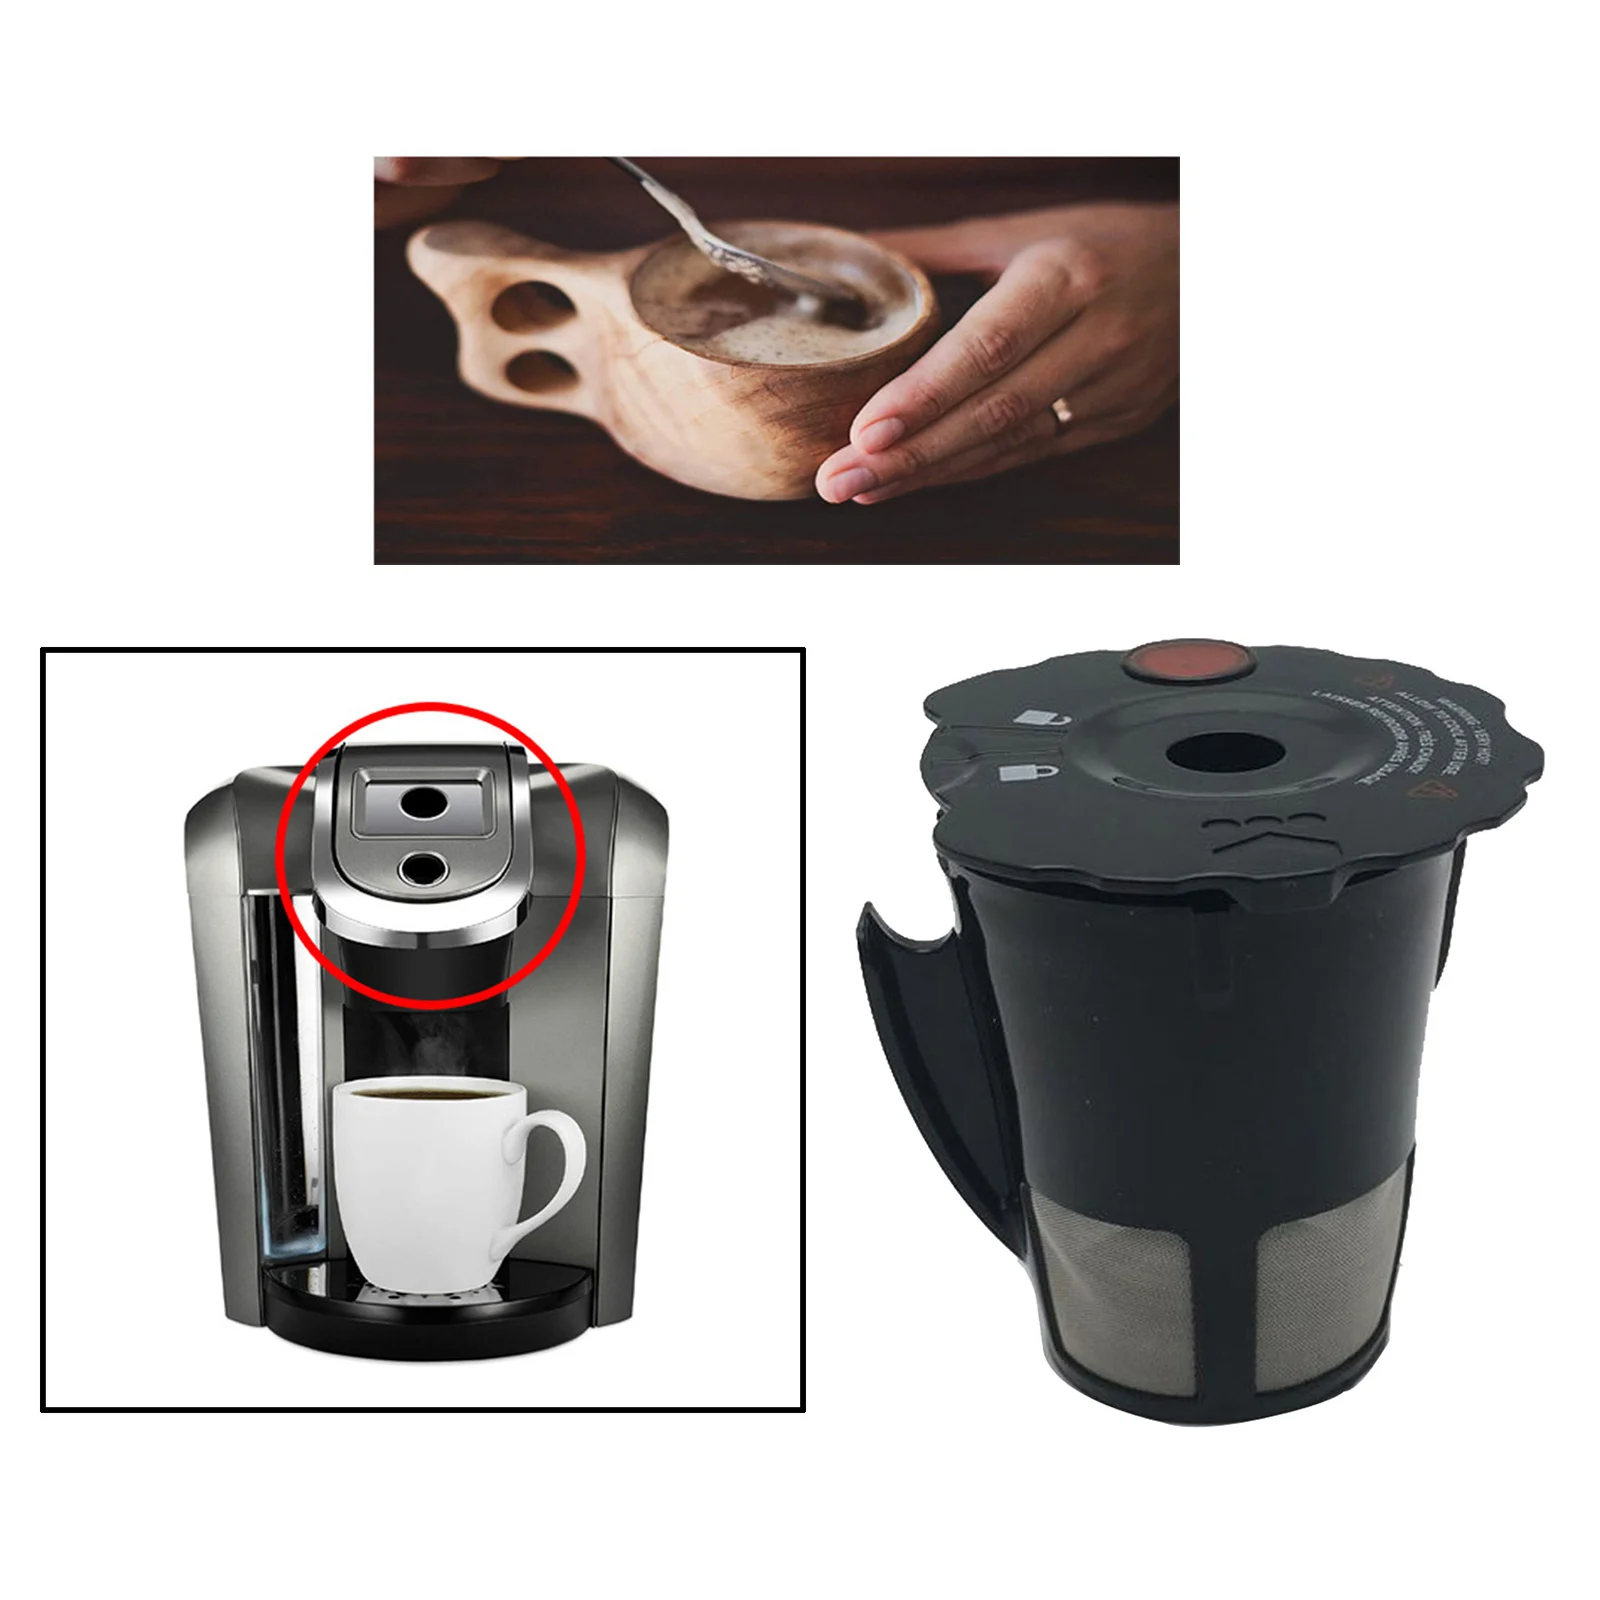 Reusable K Cups For Keurig 2.0 Brewers Eco Friendly Coffee Filters Refillable Single Cup Stainless Steel Mesh Filter